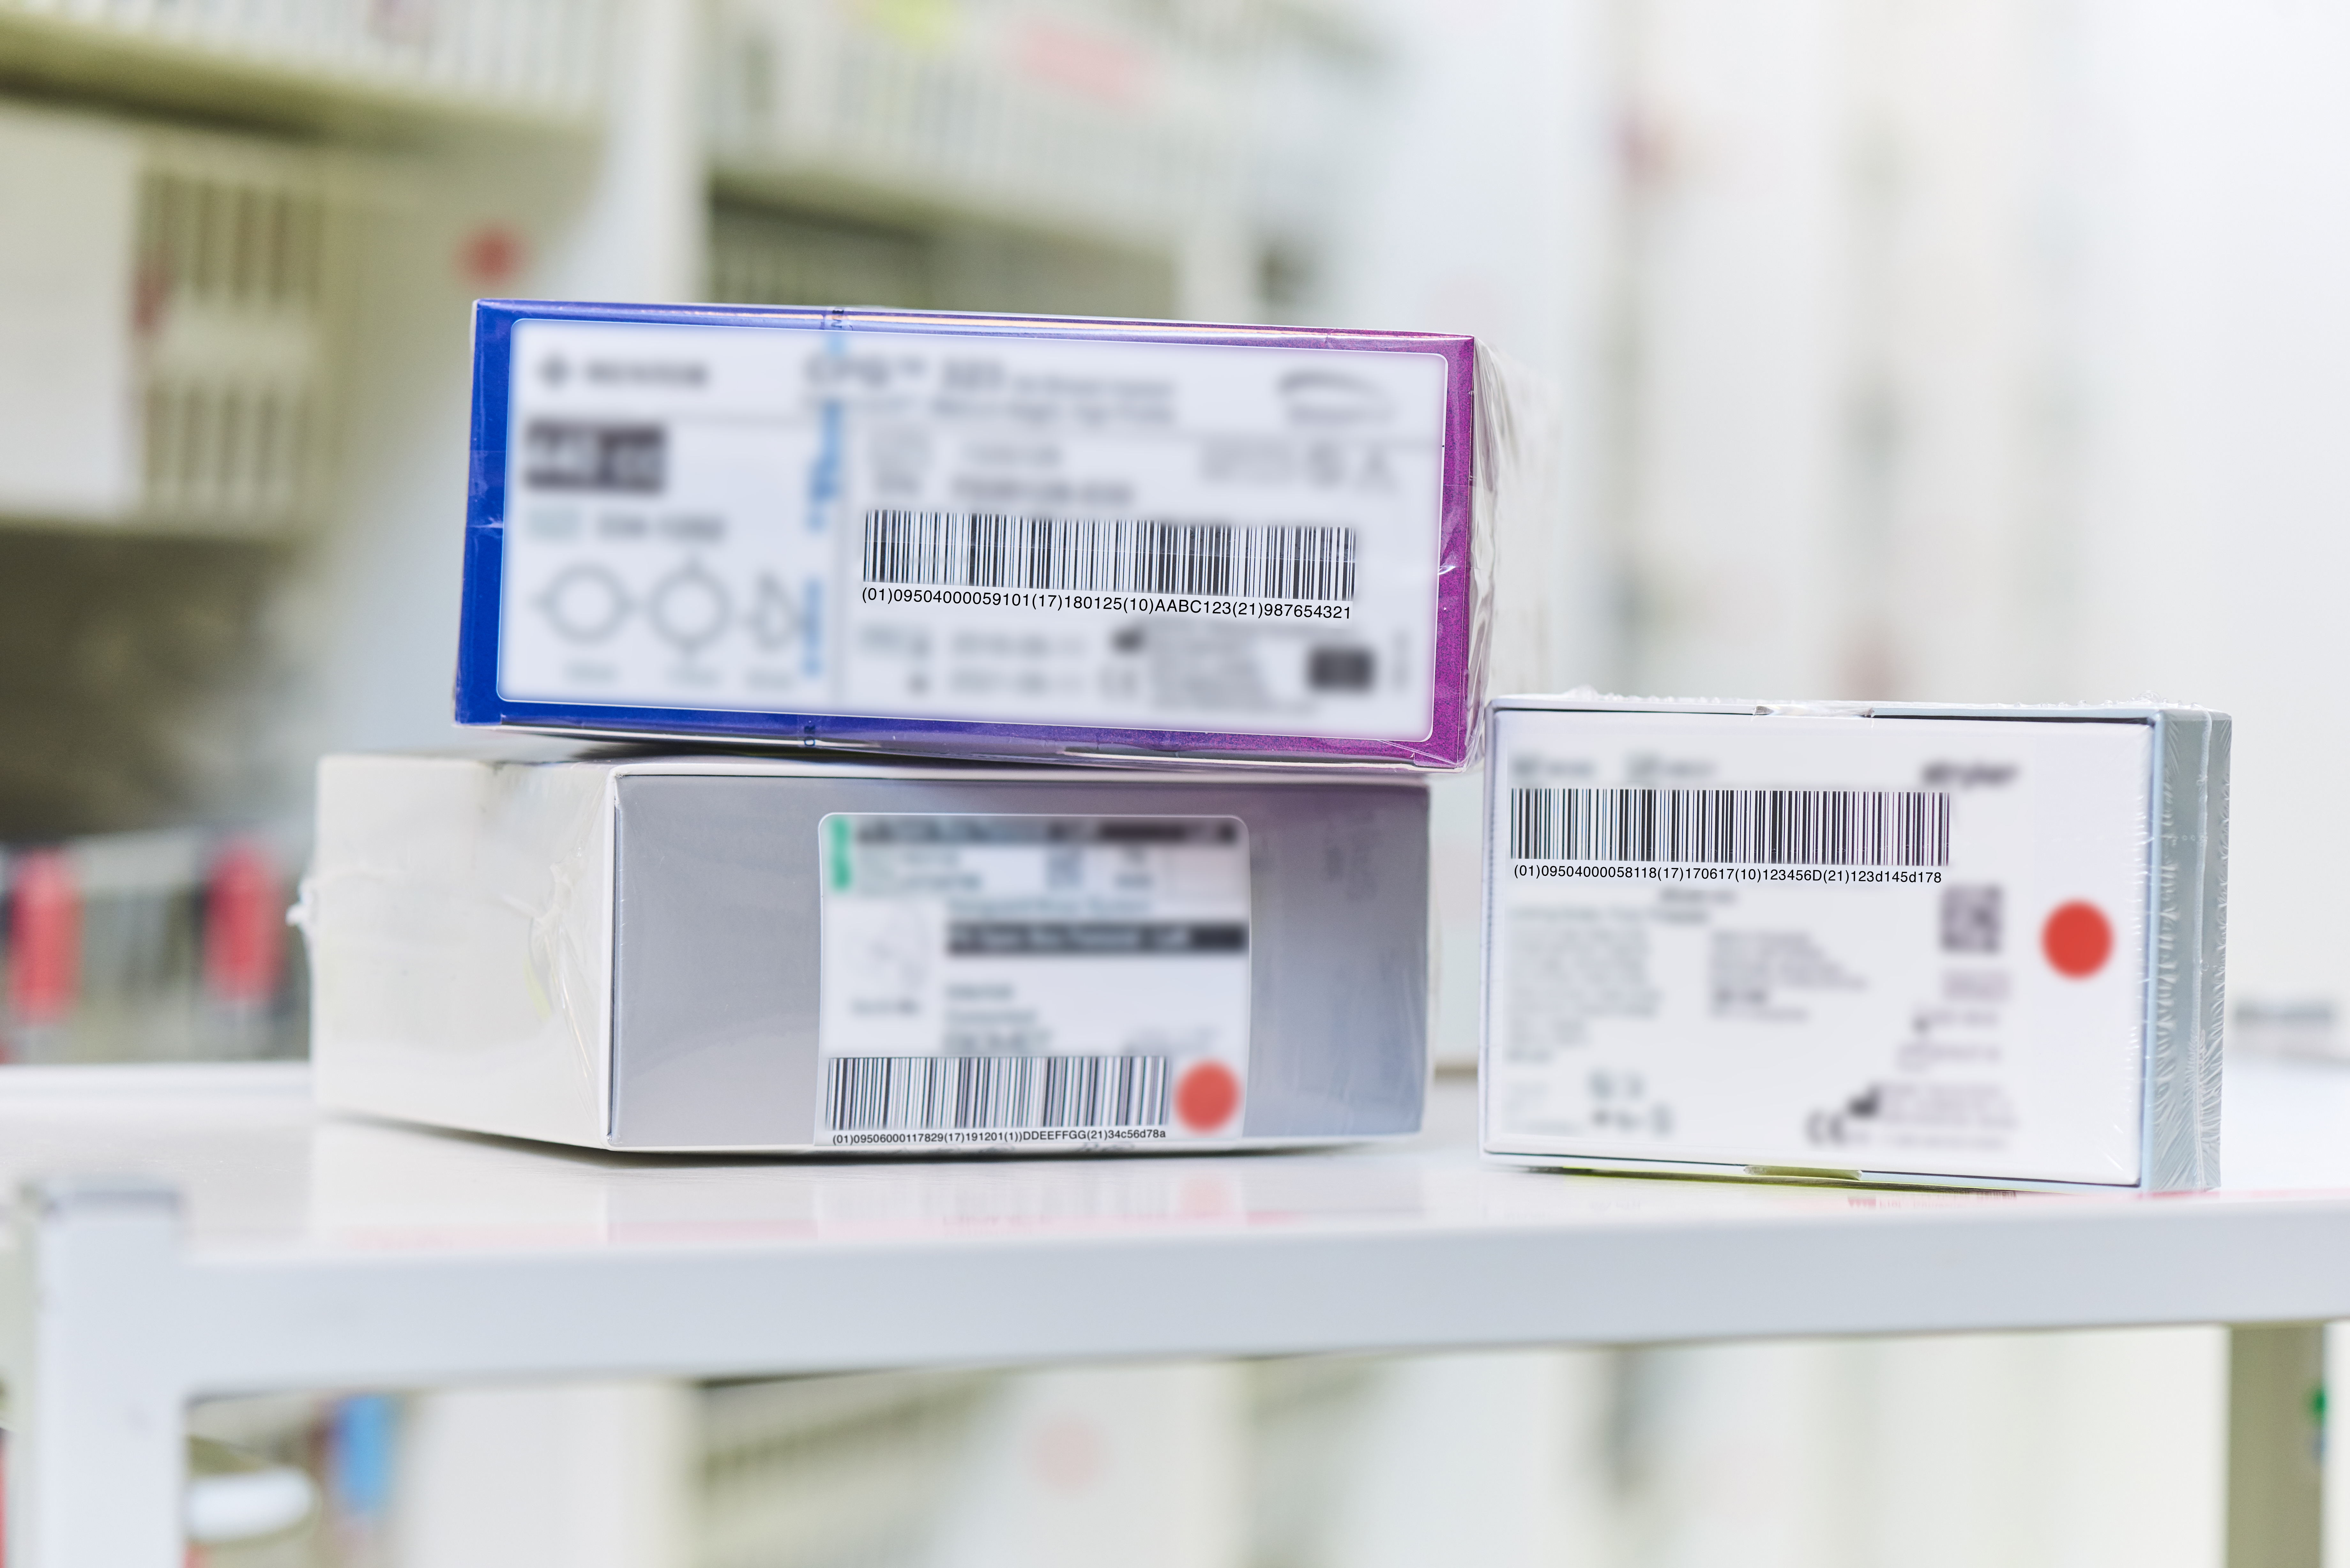 Using GS1 standards and RFID technology is a win-win for Johnson & Johnson Supply Chain